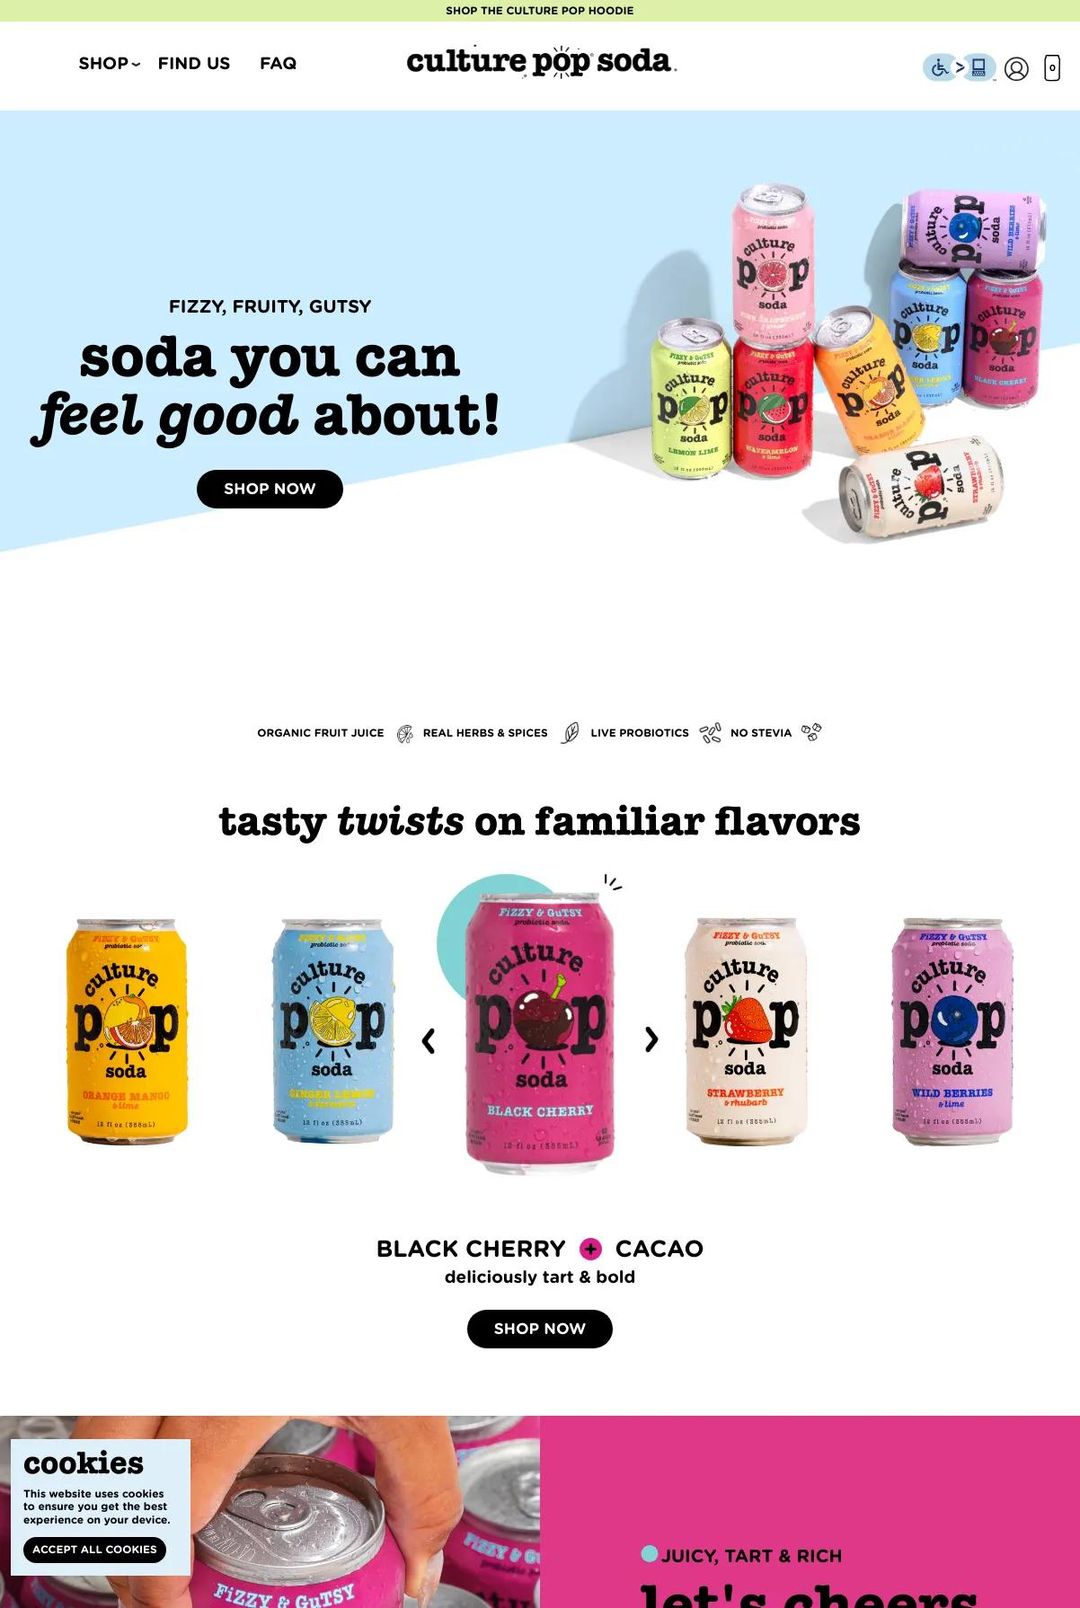 Screenshot 1 of Culture Pop (Example Shopify Food and Beverage Website)